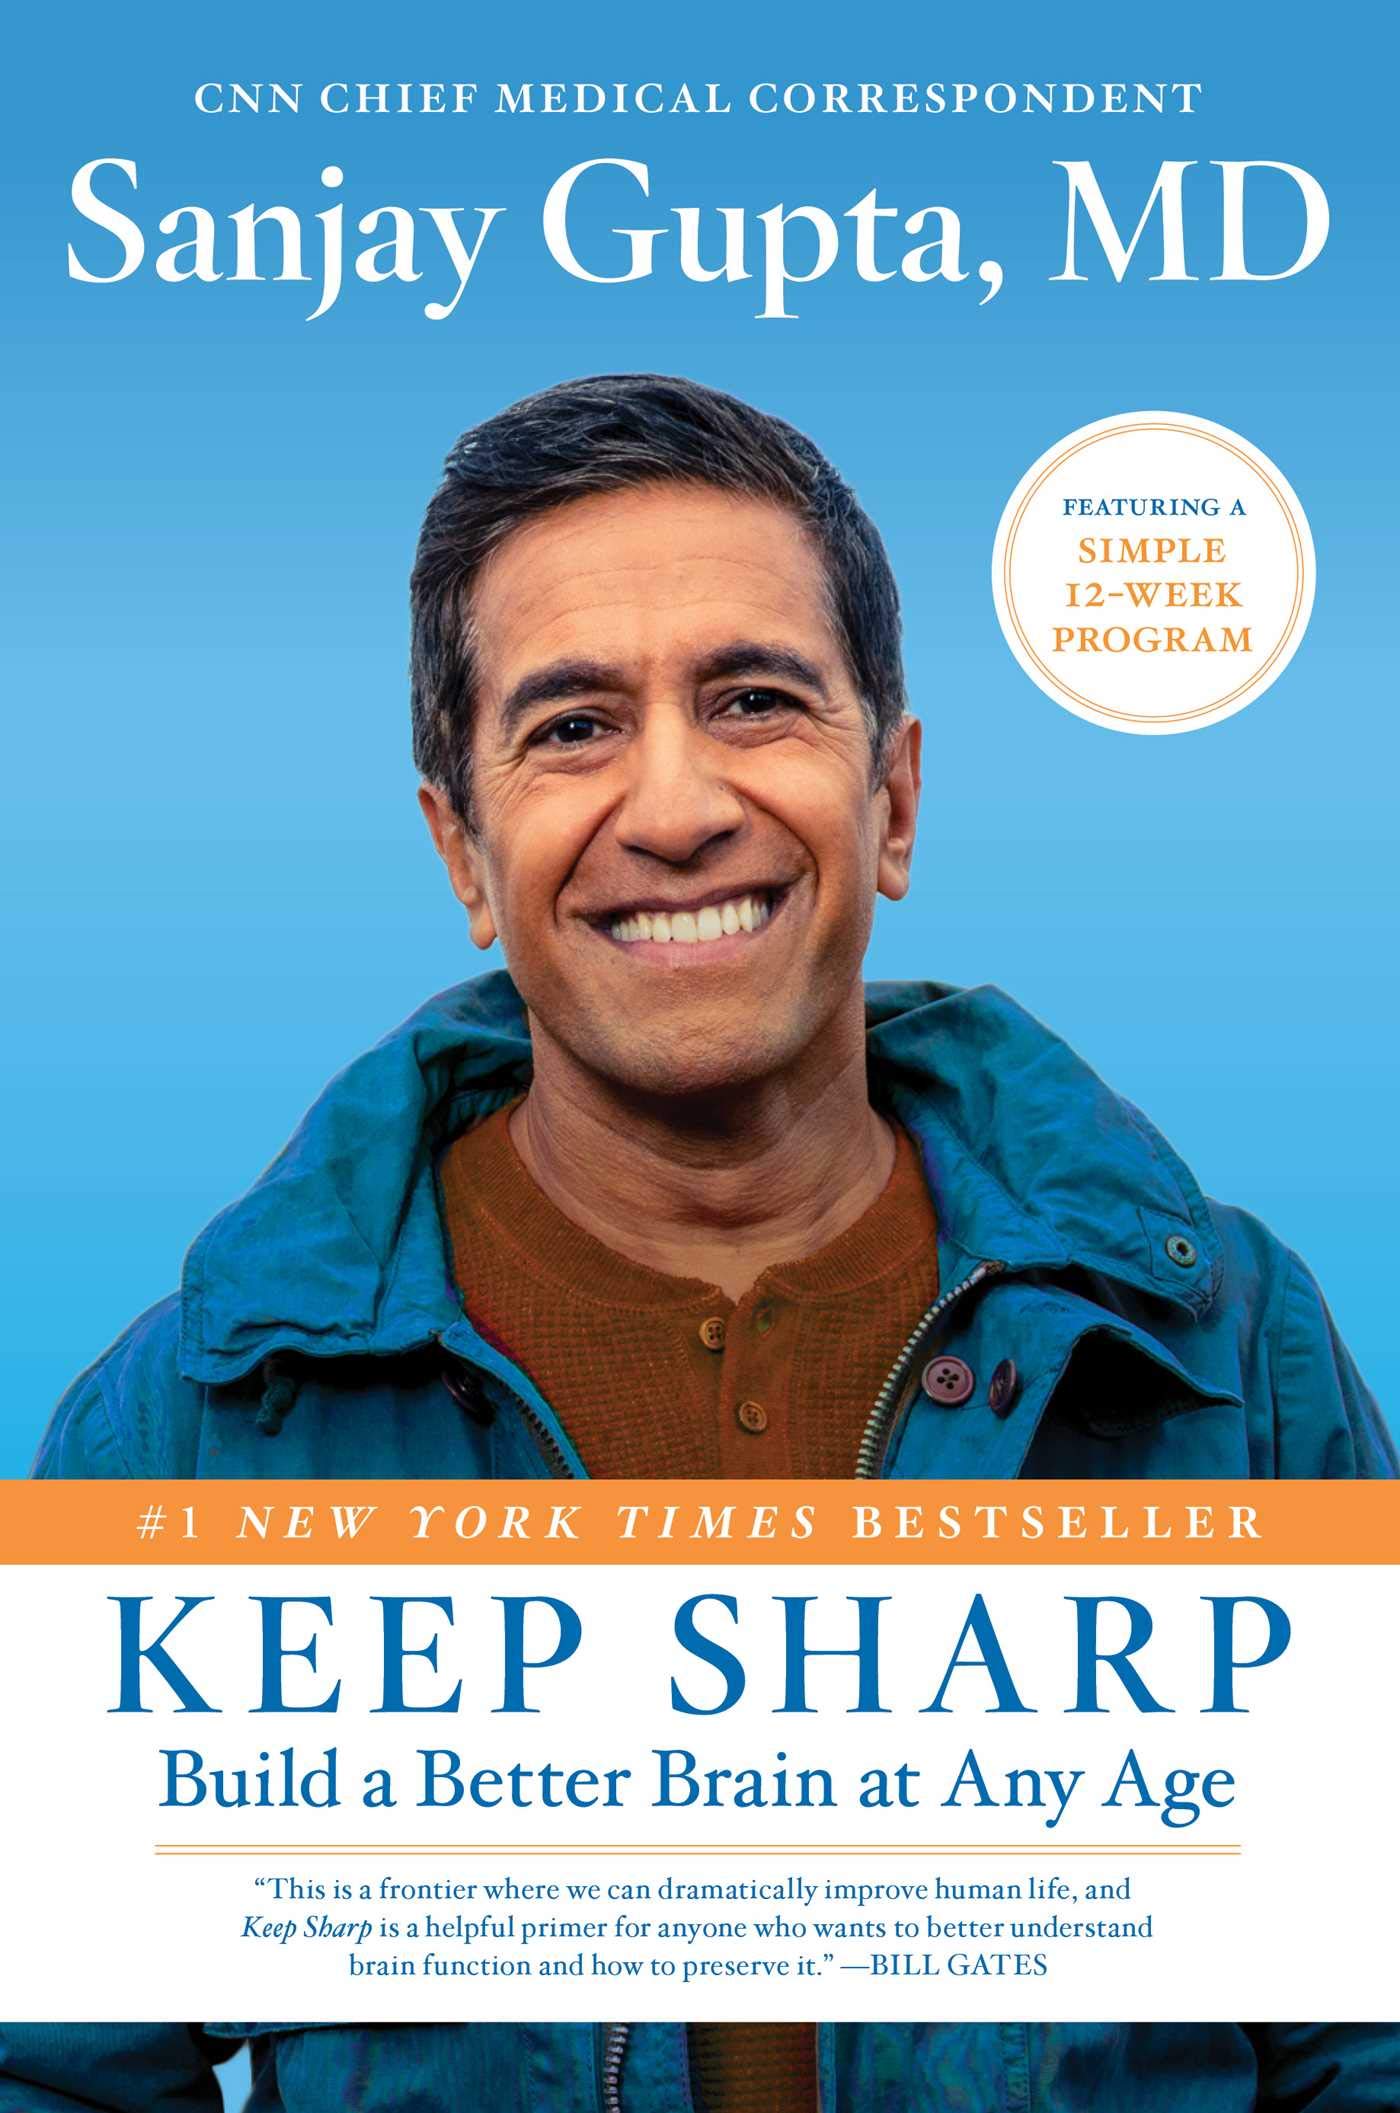 Keep Sharp: Build a Better Brain at Any Age read online at BusinessBooks.cc